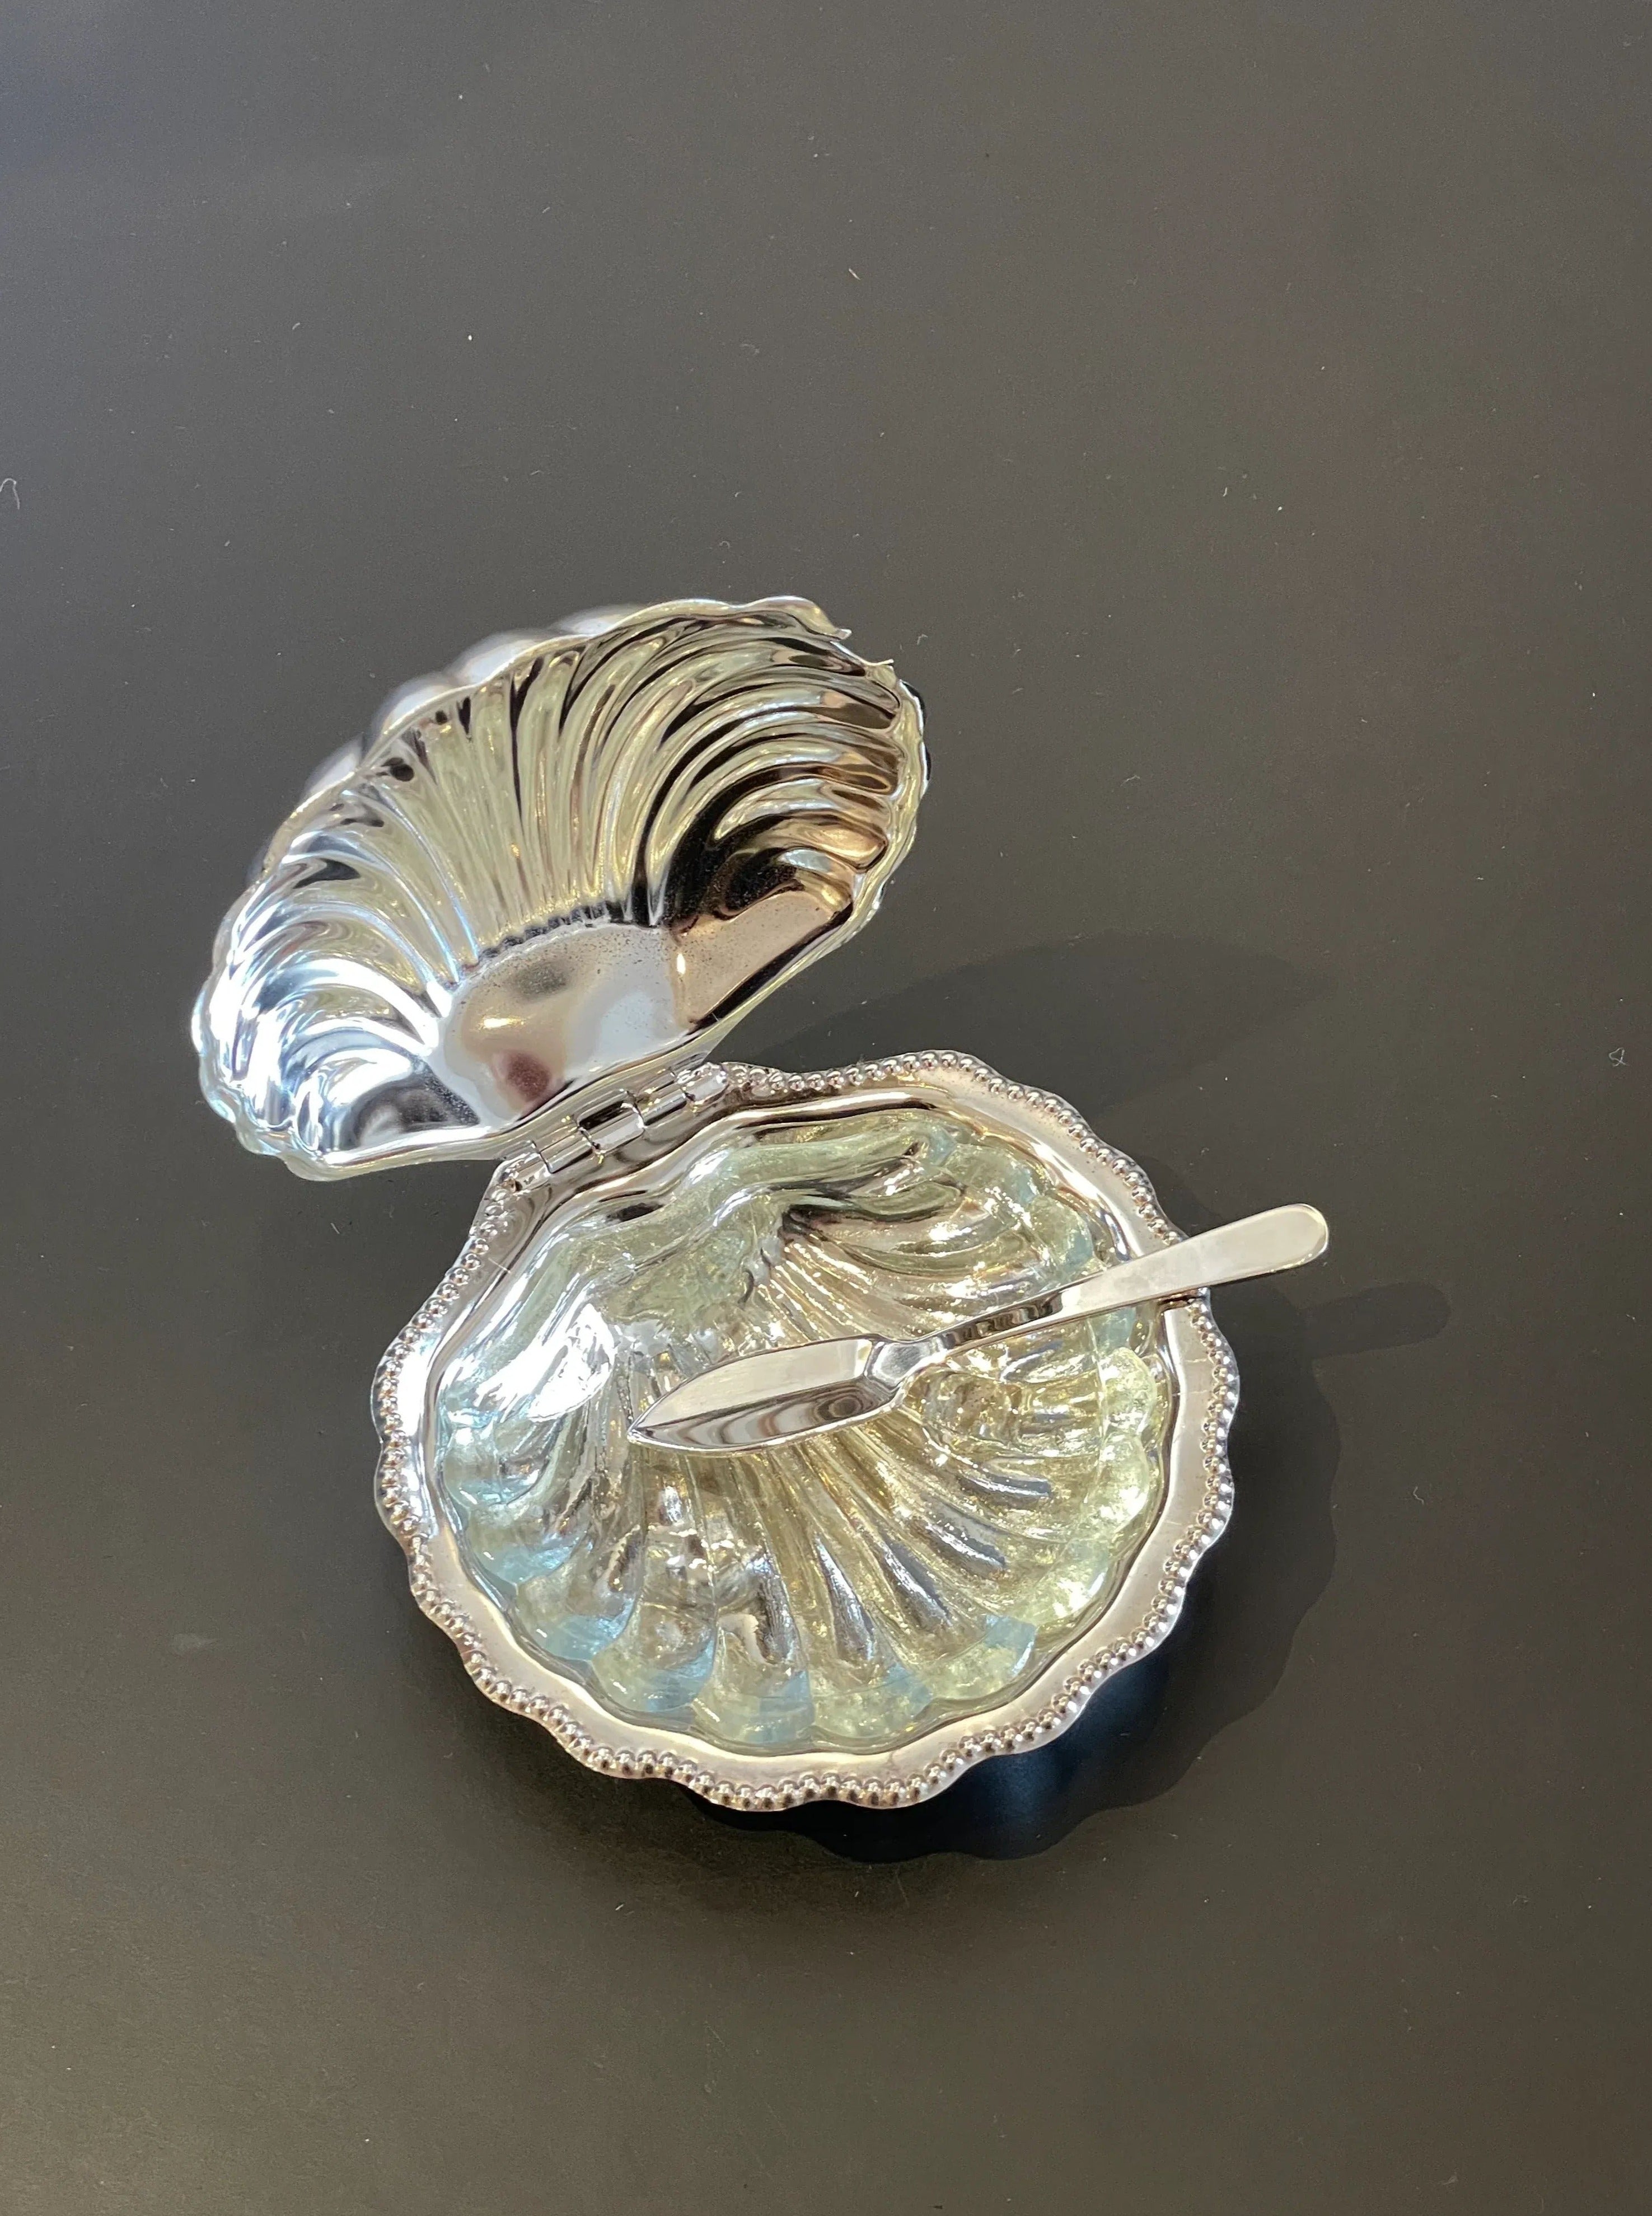 Silver plated shell butter dish with intricate design and smooth finish